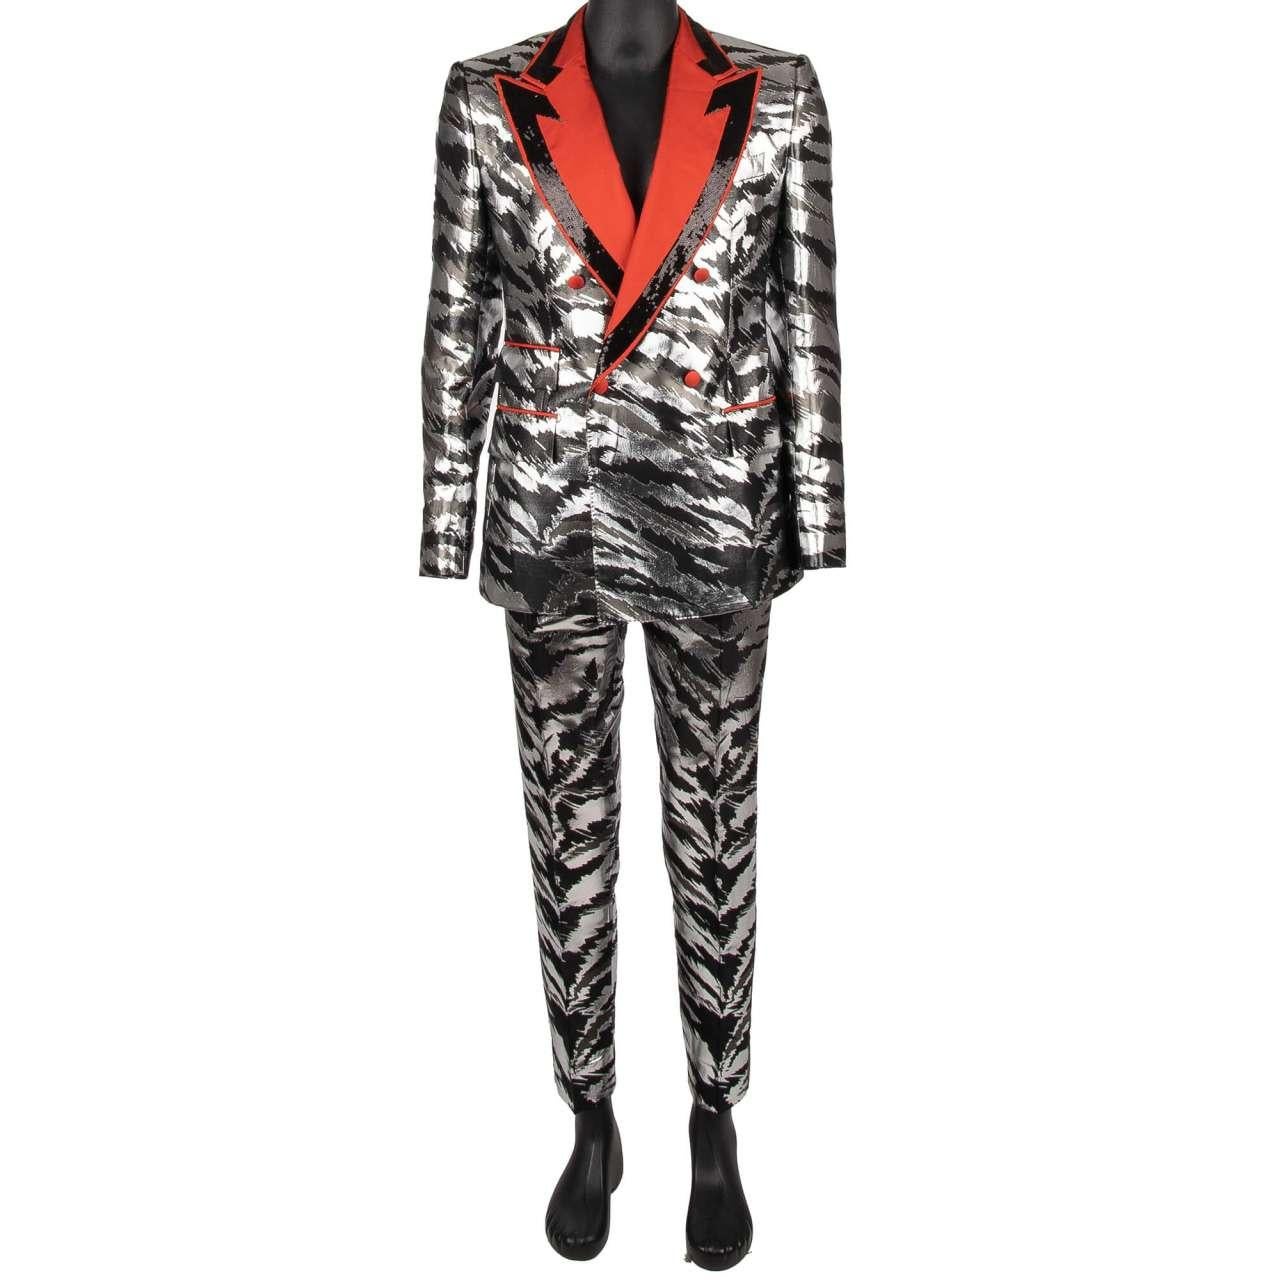 Men's D&G Sequin Jacquard Double breasted Suit Silver Black Red 50 US 40 M L For Sale